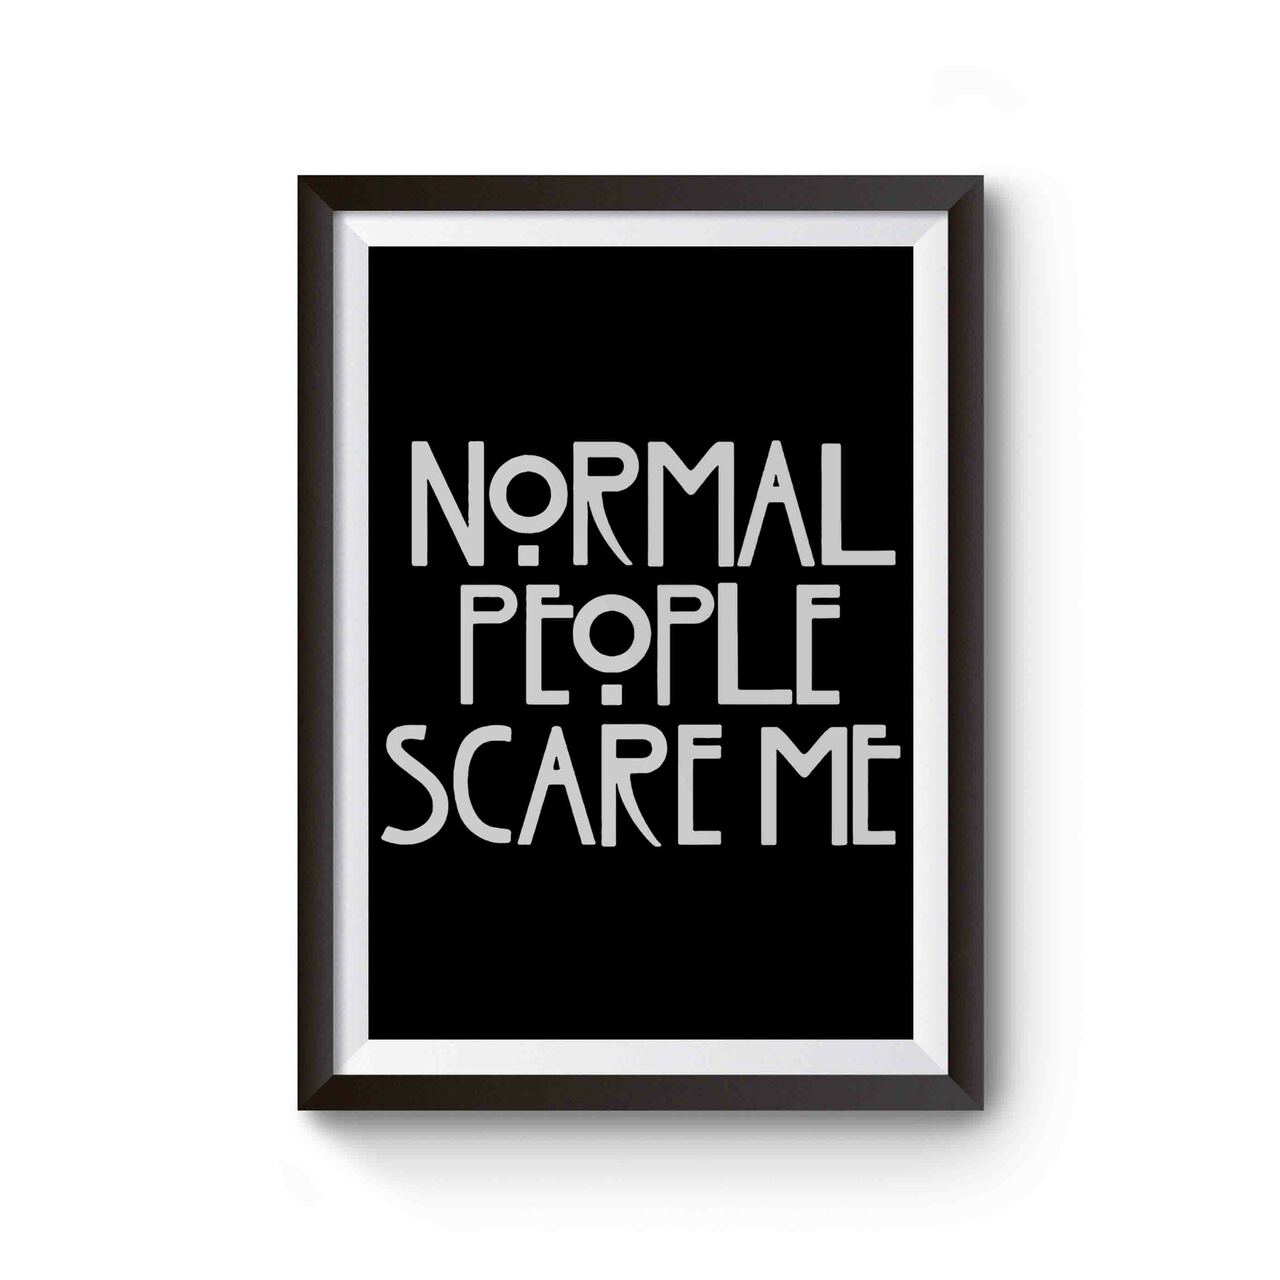 Normal People Scare Me Funny Horror Movie Poster